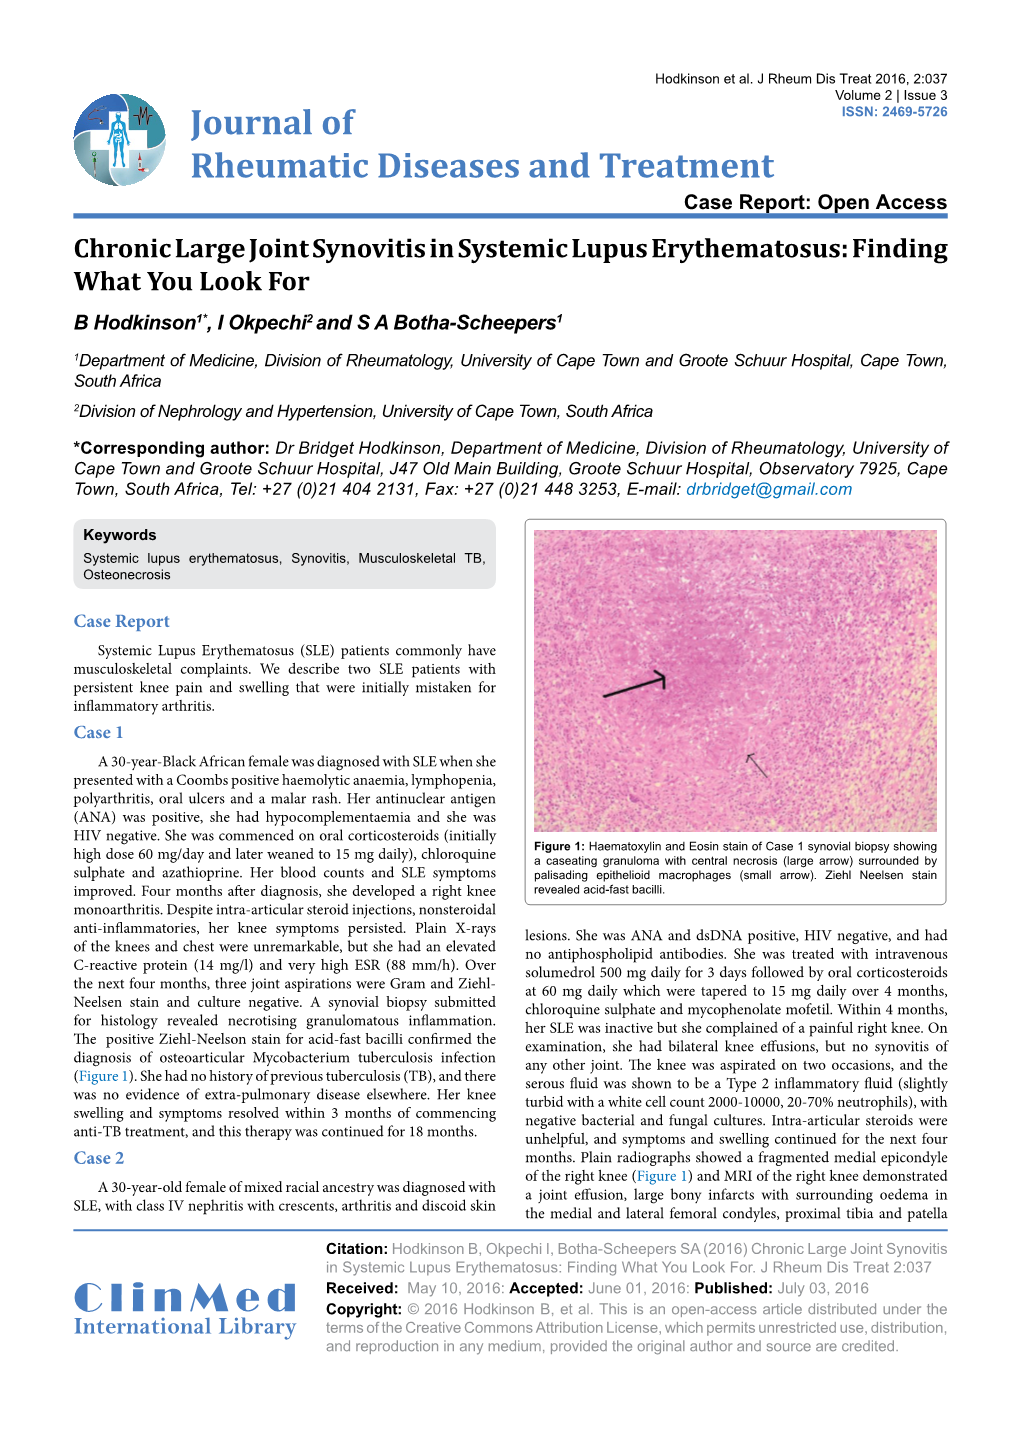 Chronic Large Joint Synovitis in Systemic Lupus Erythematosus: Finding What You Look for B Hodkinson1*, I Okpechi2 and S a Botha-Scheepers1